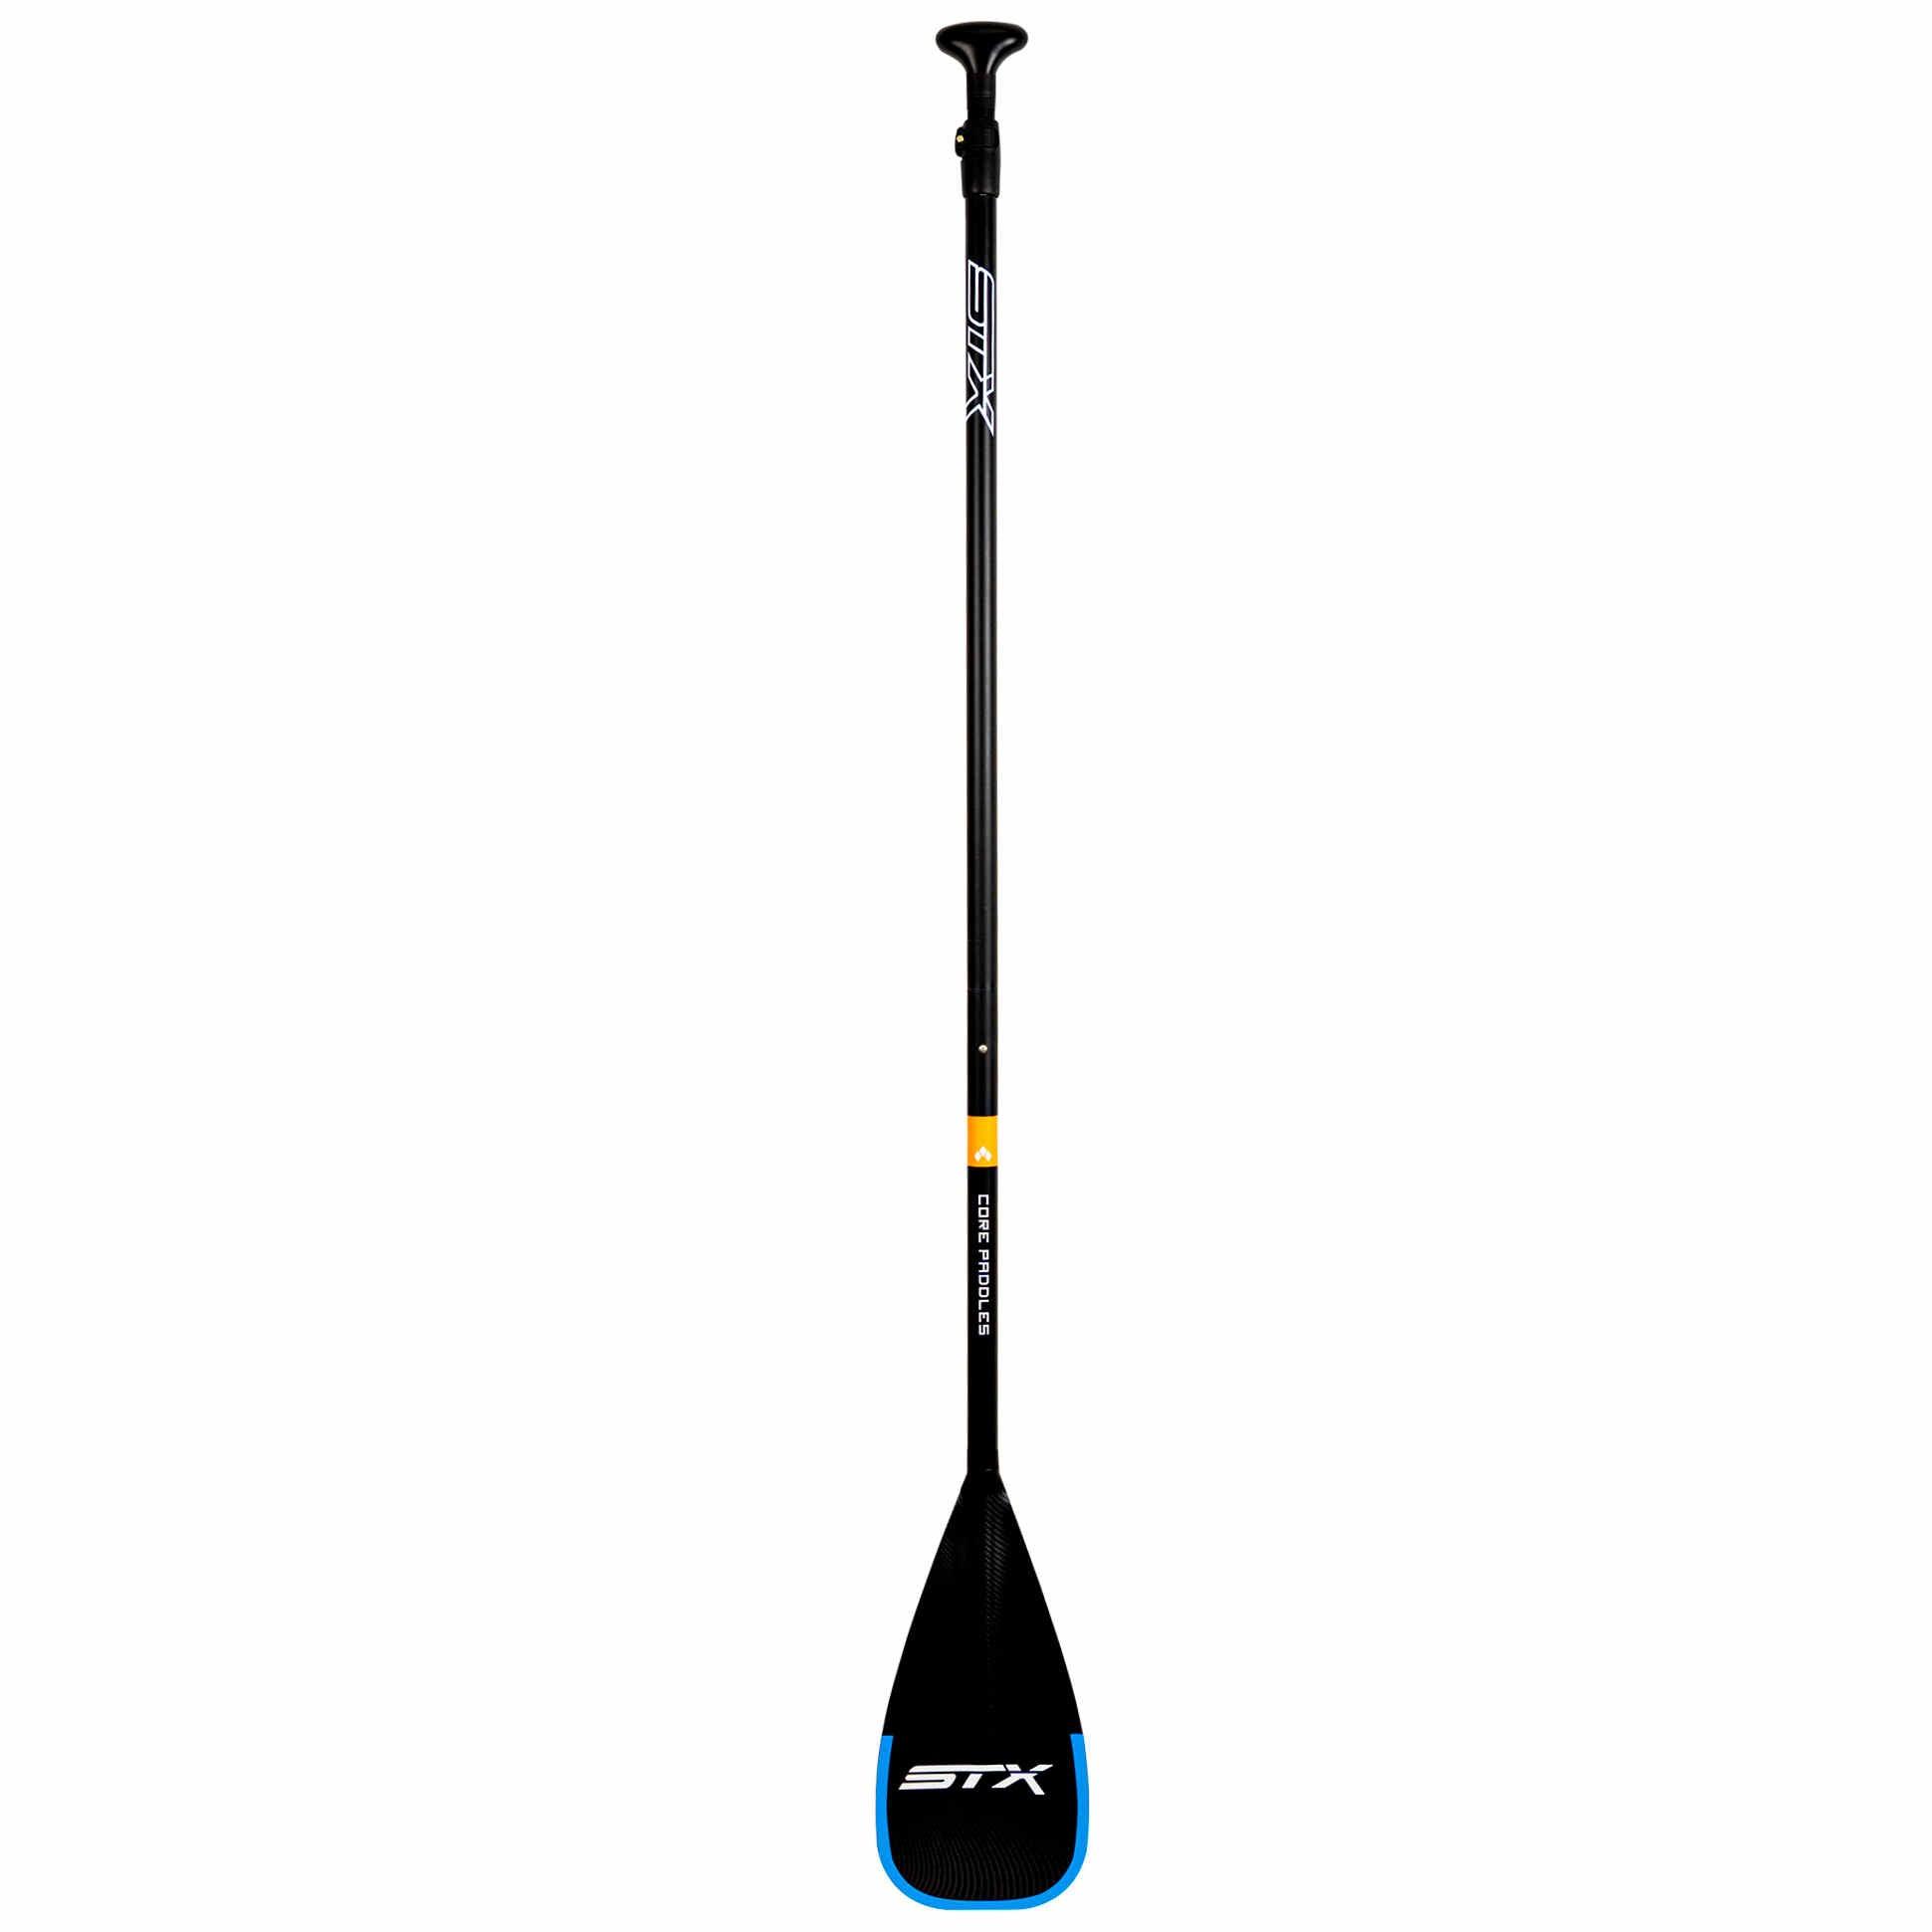 STX Glass Adjustable SUP Paddle - Poole Harbour Watersports